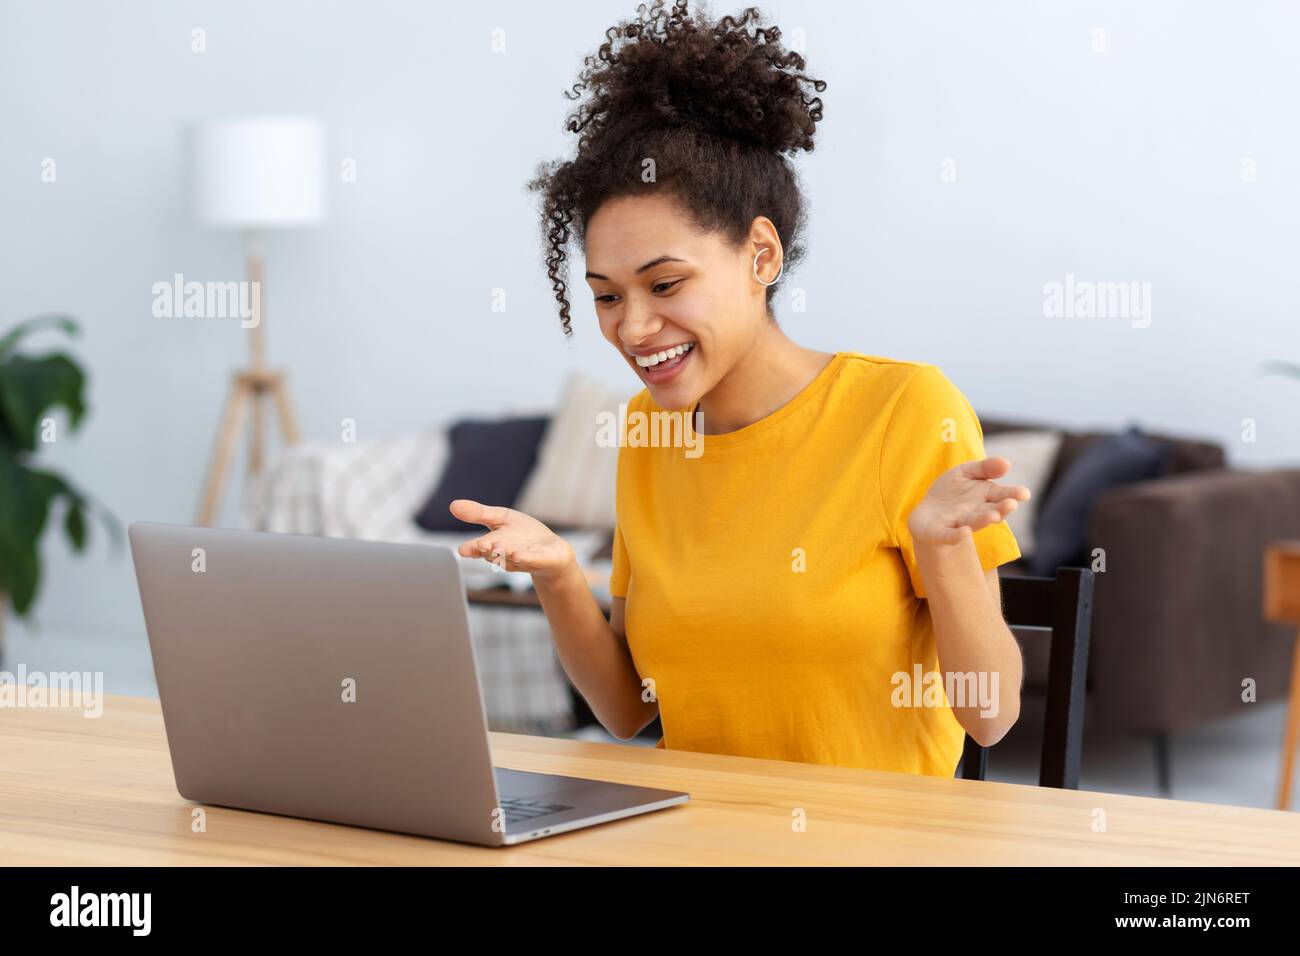 happy female student using laptop computer having video call sitting learning language Stock Photo